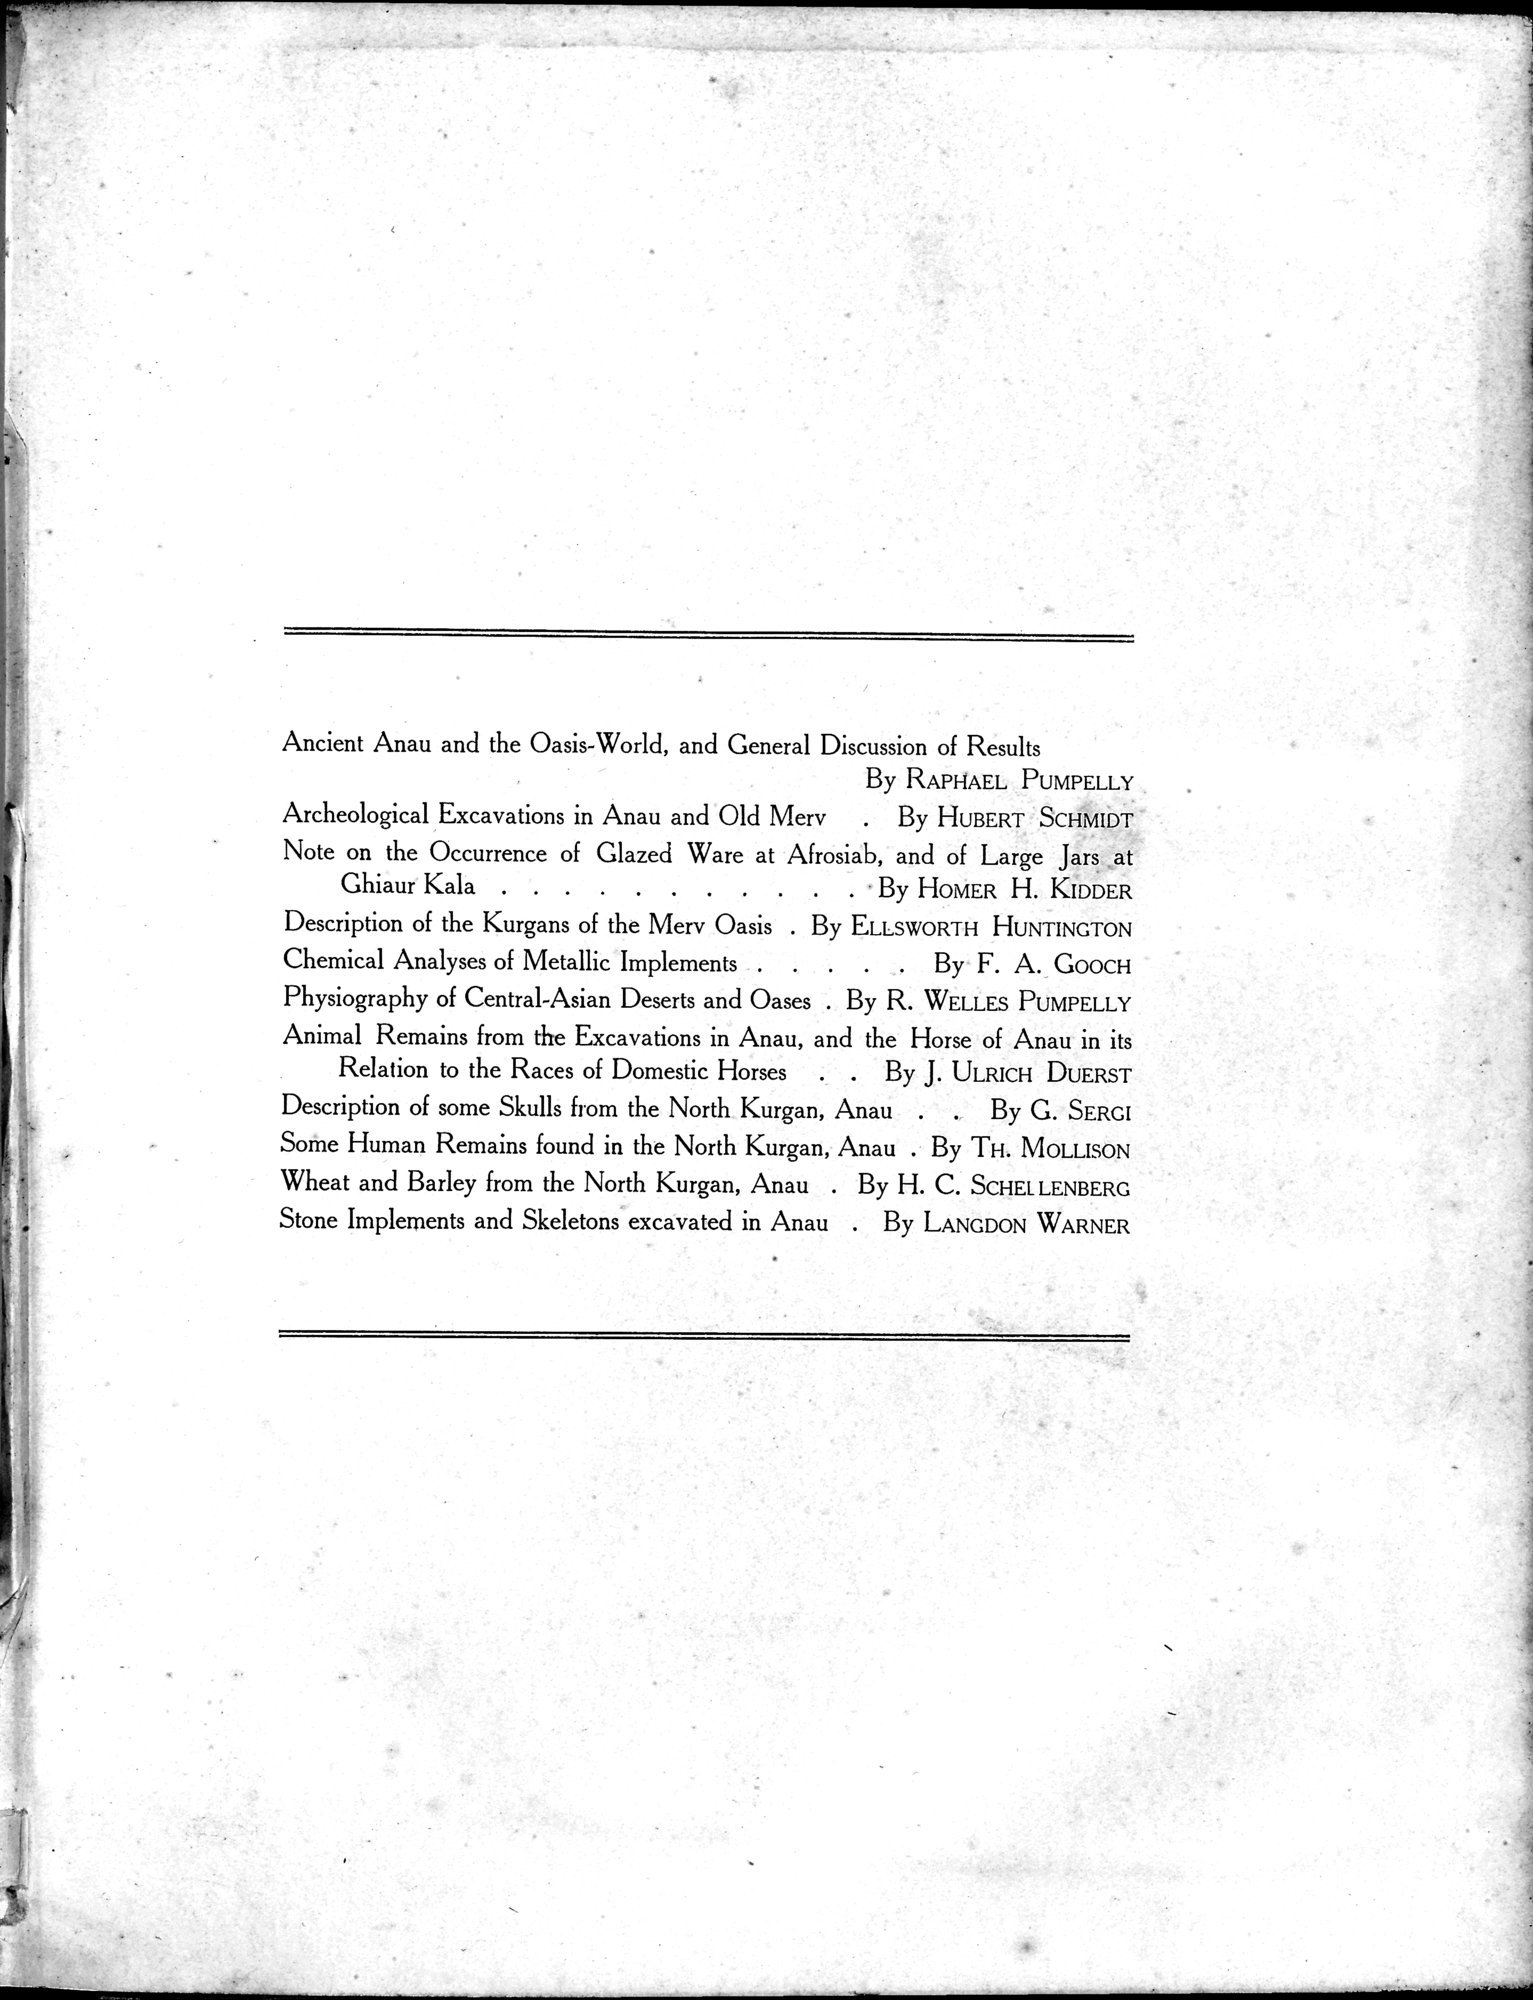 Explorations in Turkestan : Expedition of 1904 : vol.2 / Page 11 (Grayscale High Resolution Image)